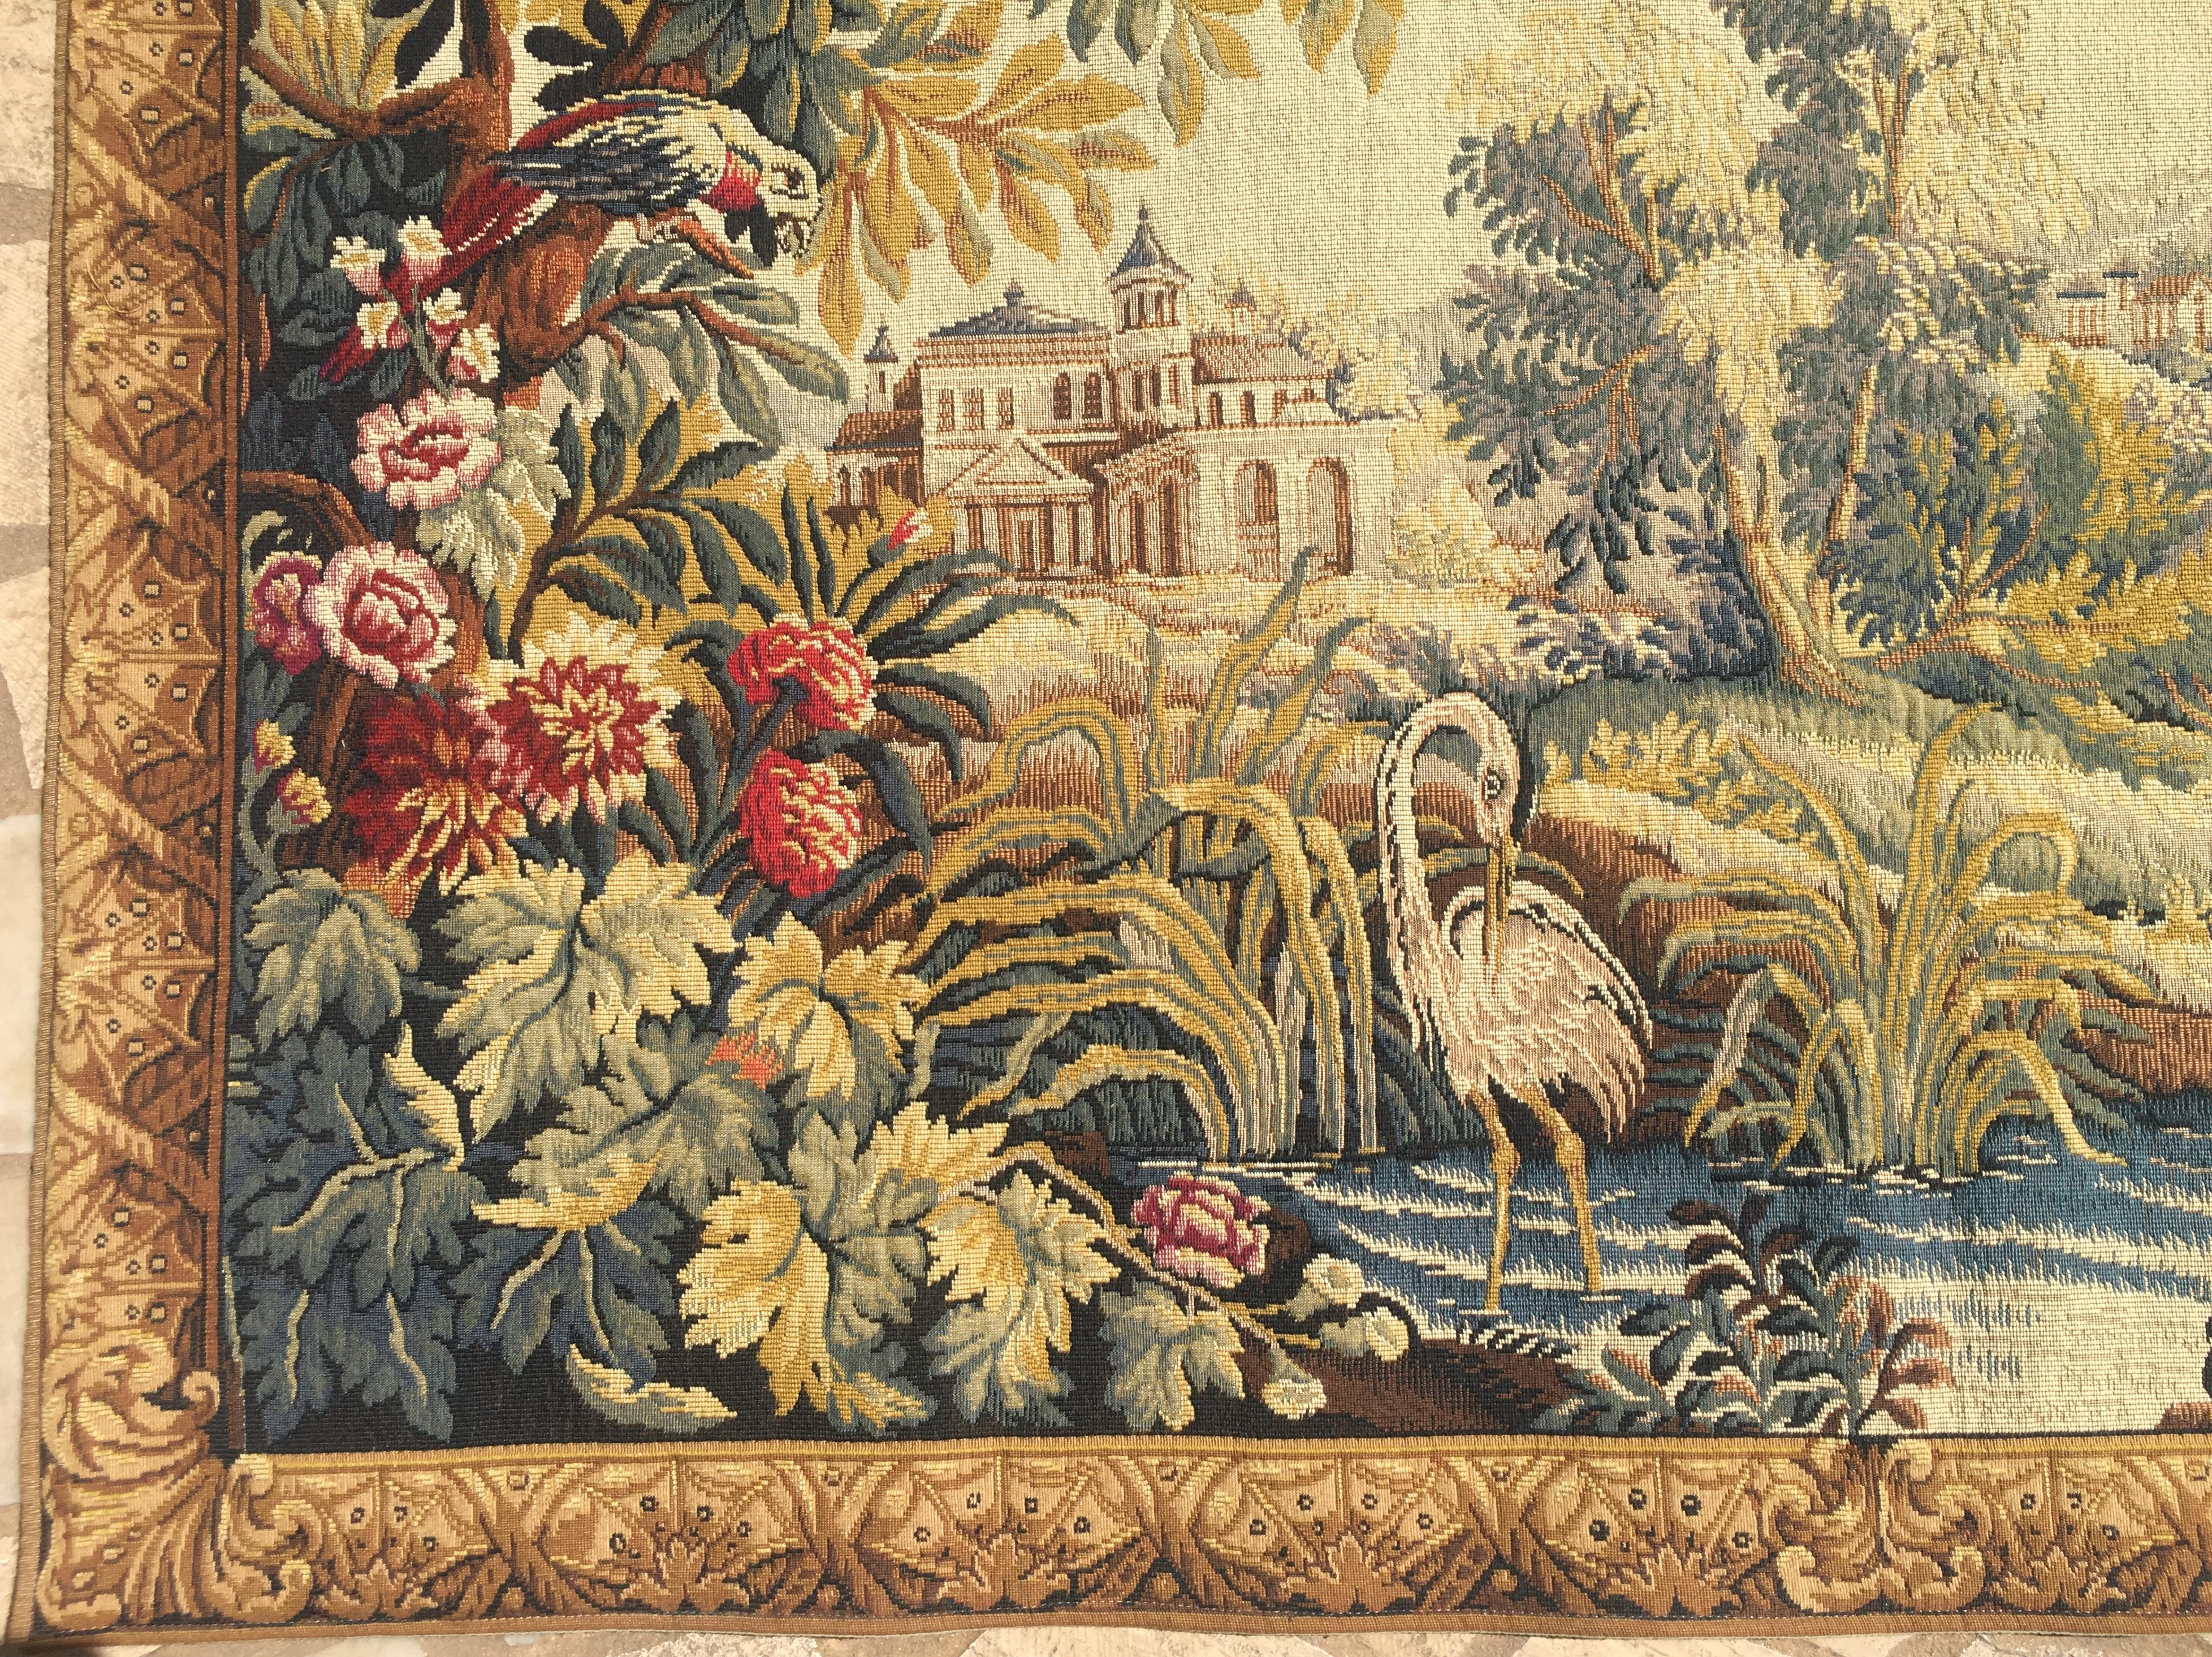 Hand-Crafted French Aubusson Style Tapestry with Castles, River, Ducks, and Foliage